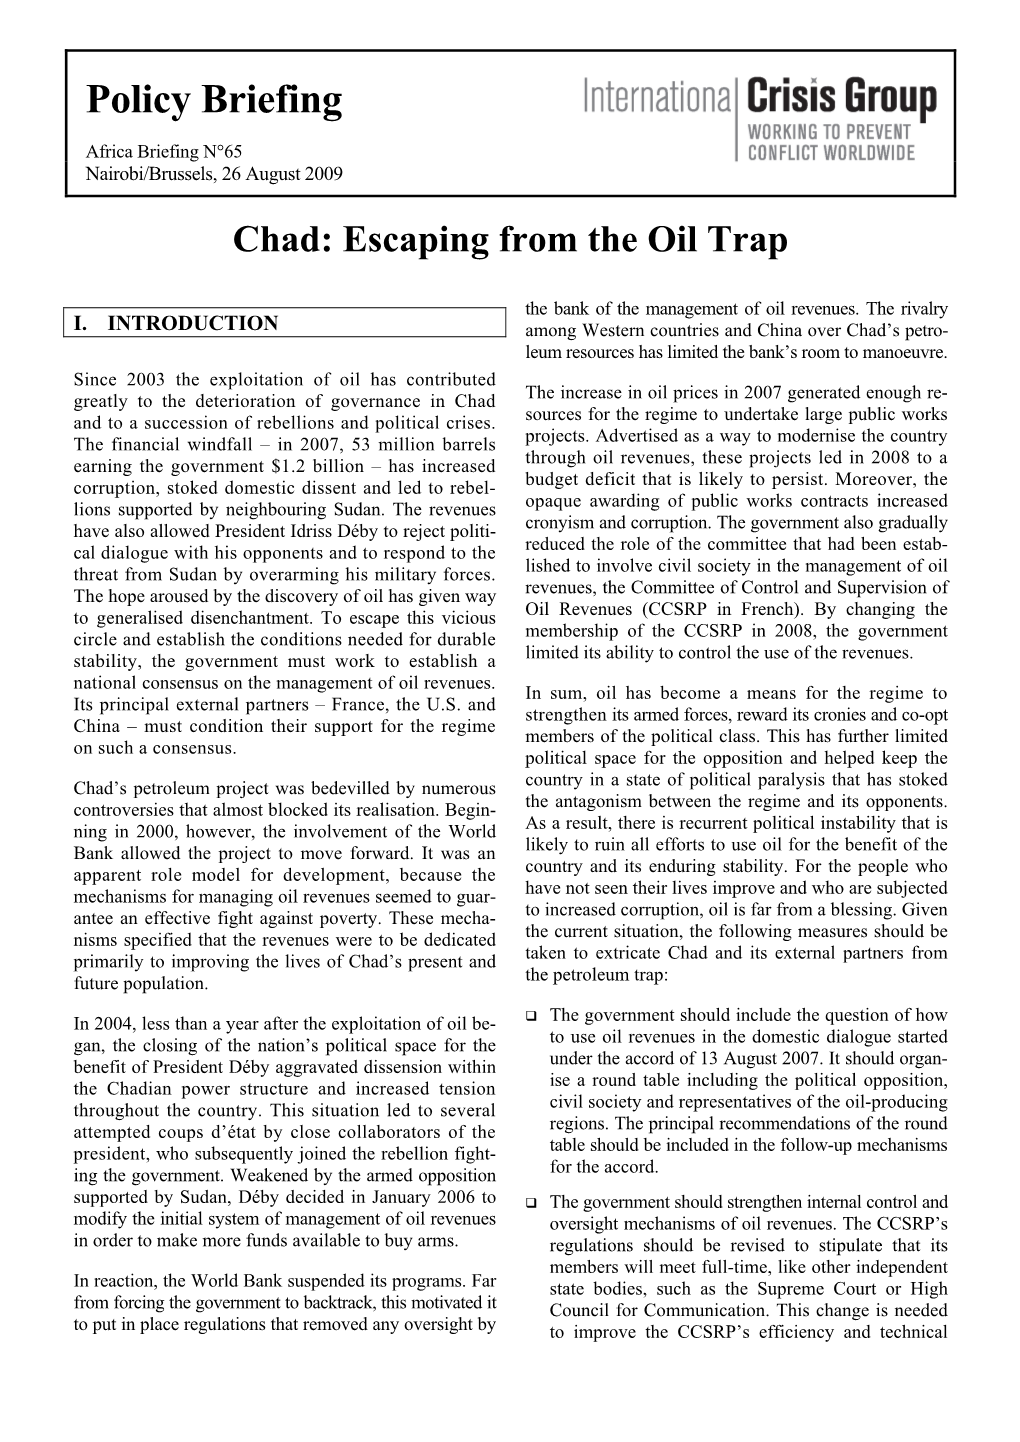 Chad: Escaping from the Oil Trap